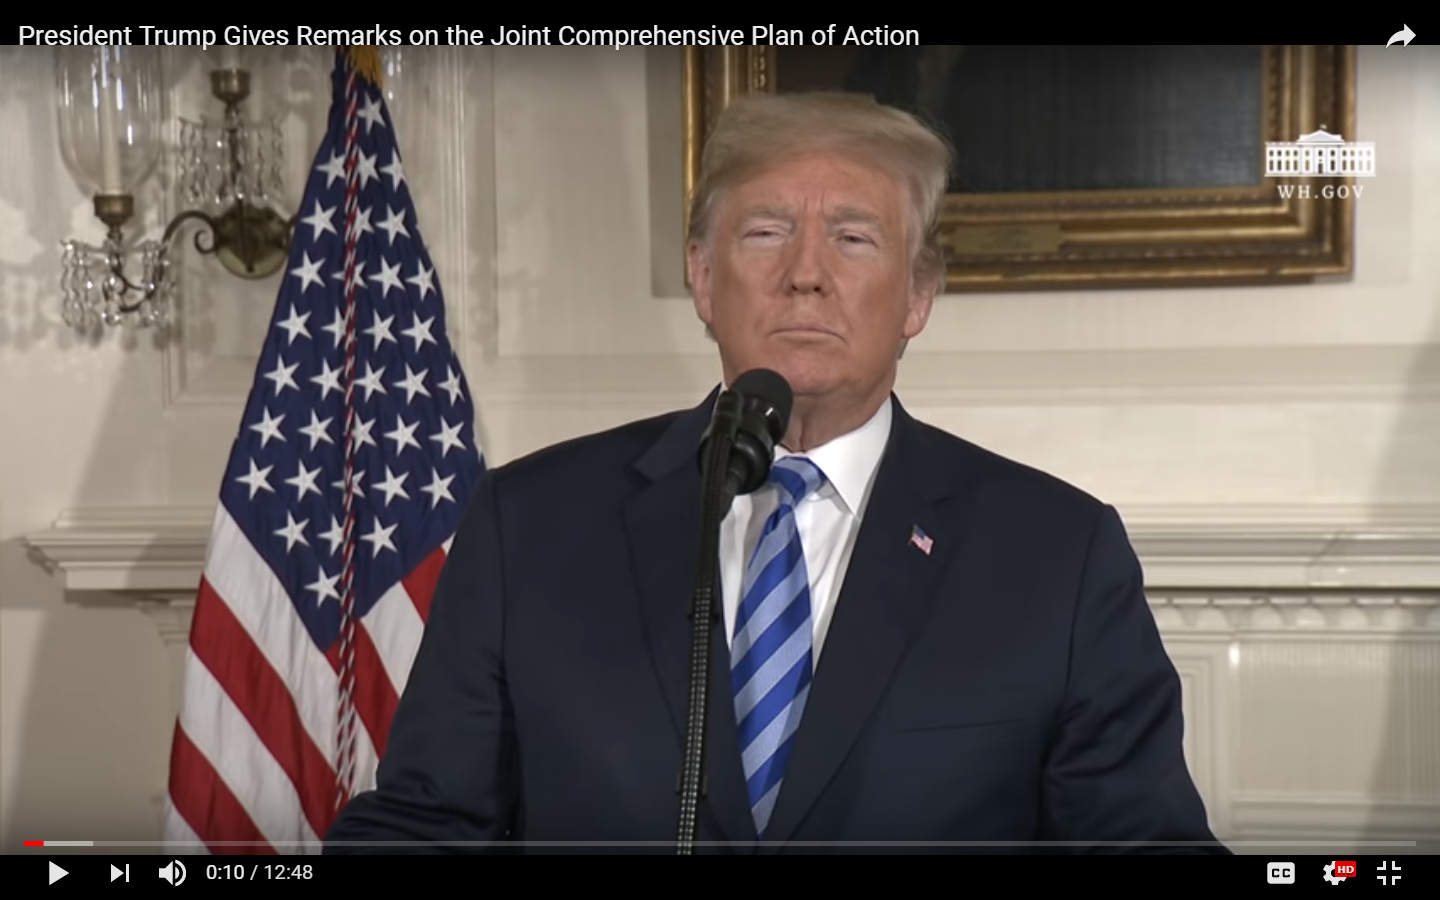 Trump announces withdrawal from JCPOA